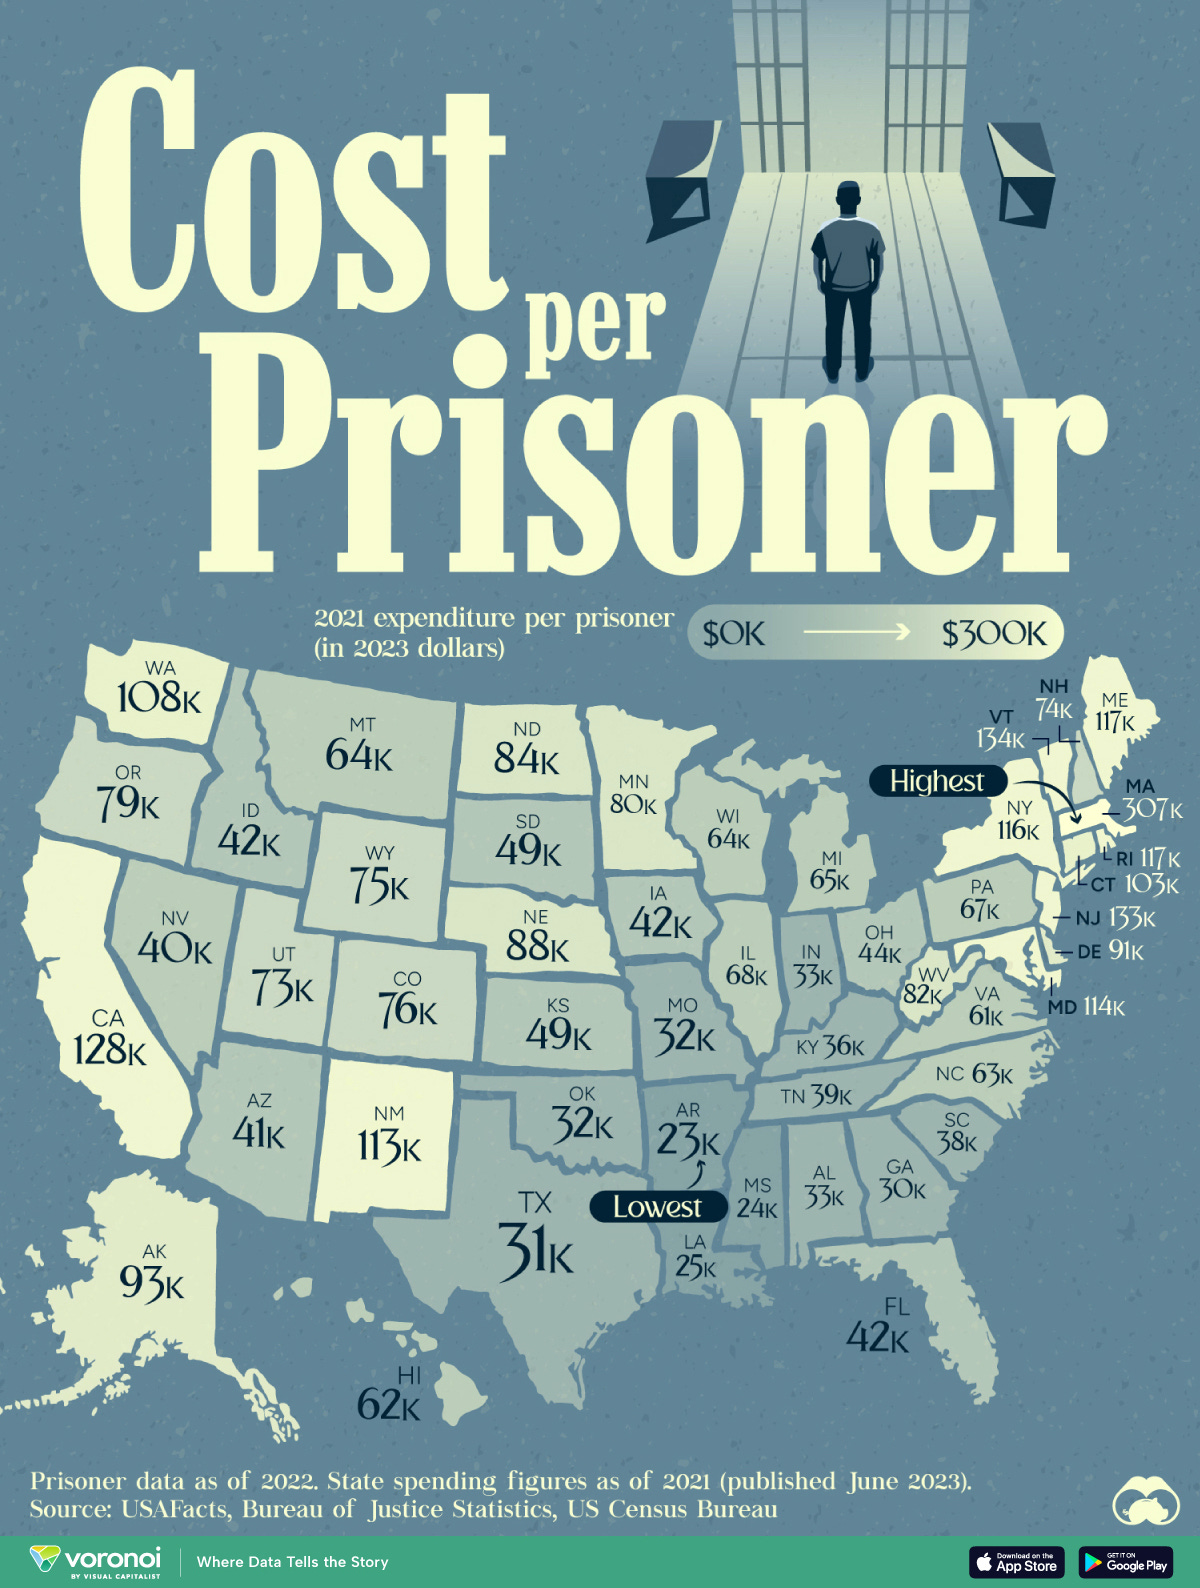 In this map, we illustrate the cost per prisoner across all U.S. states.